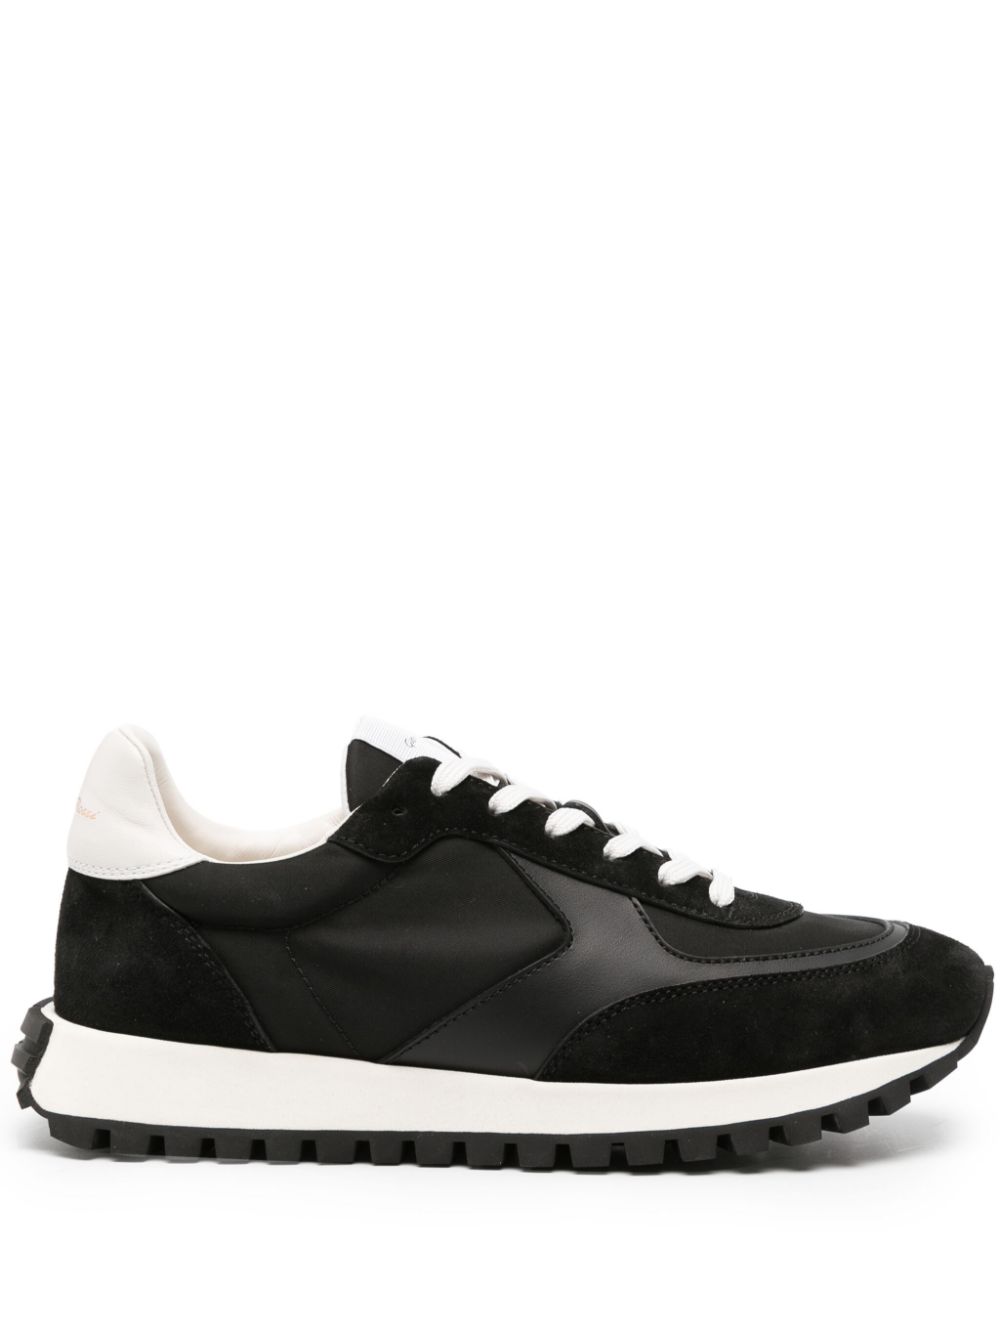 Gianvito Rossi Gravel panelled suede sneakers - Black